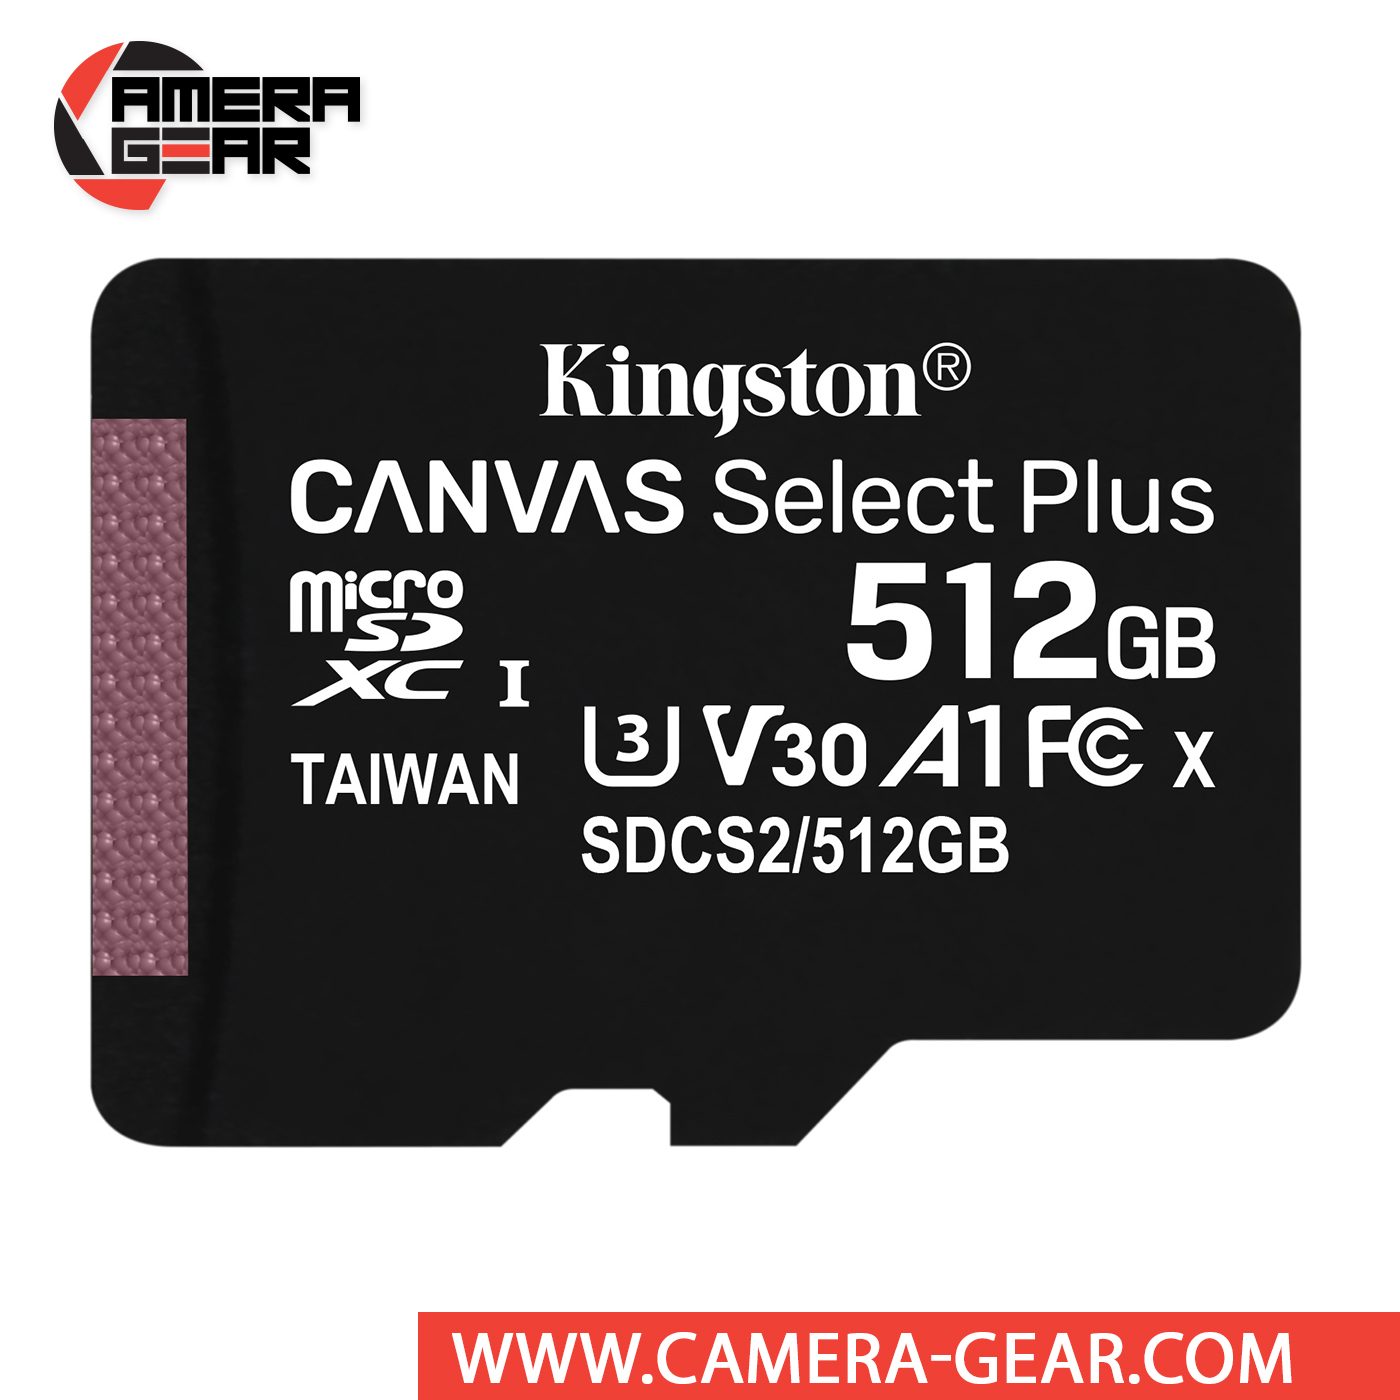 Kingston 512GB LG VS810PP MicroSDXC Canvas Select Plus Card Verified by SanFlash. 100MBs Works with Kingston 